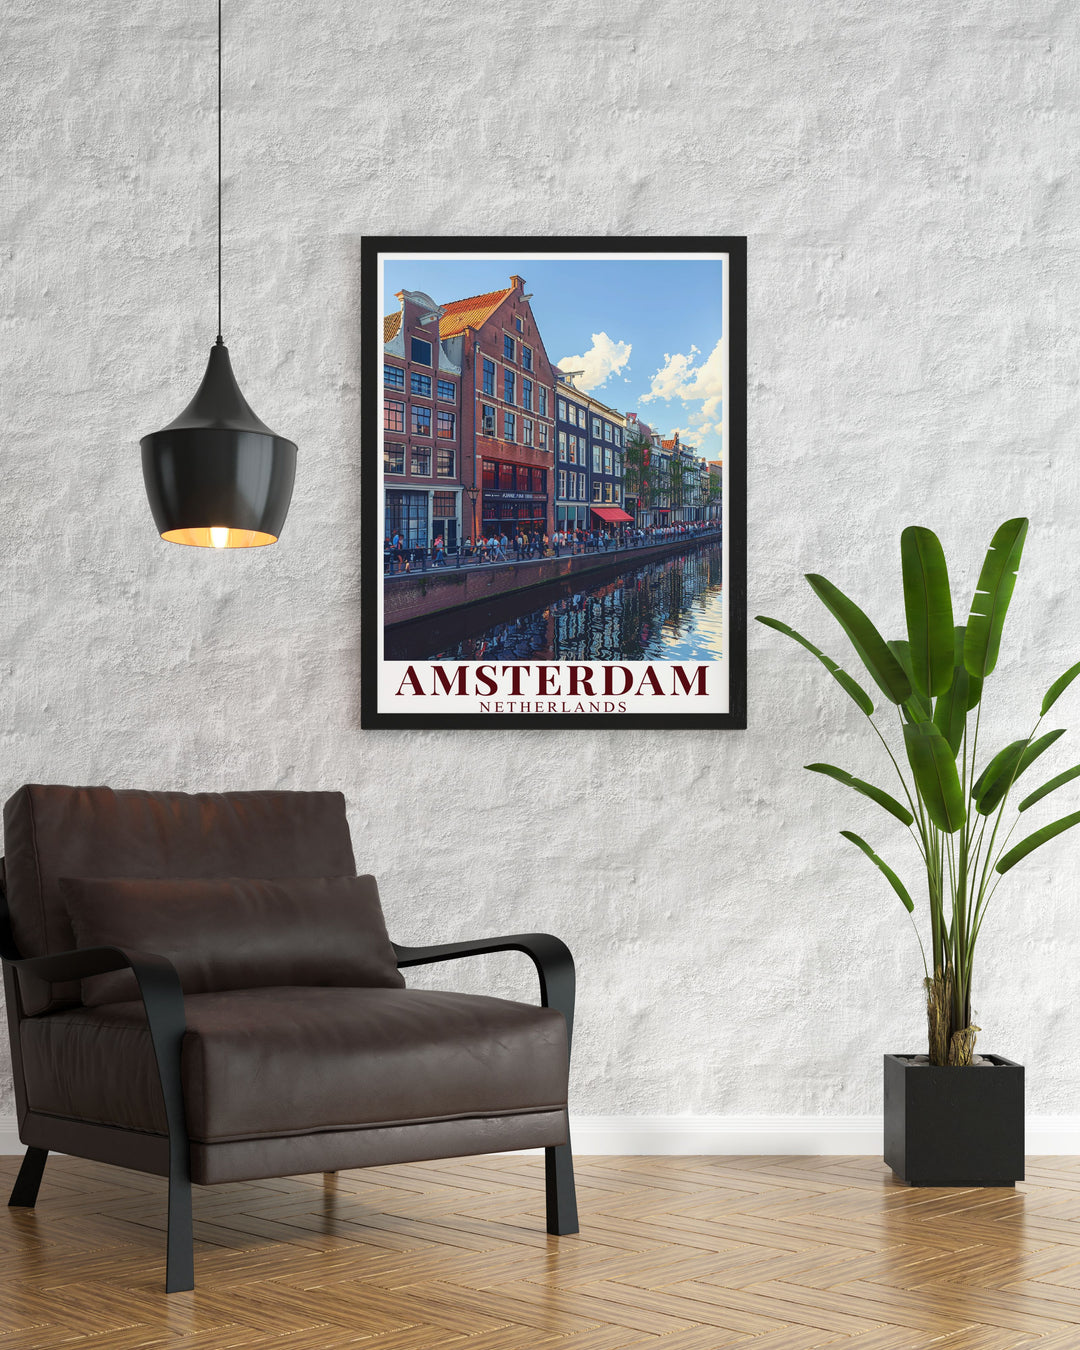 Elegant Amsterdam photo of the Anne Frank House. A perfect addition to your Amsterdam decor collection. This Amsterdam art print showcases the citys historical landmarks and vibrant culture. Ideal for those who love city prints and fine line art.